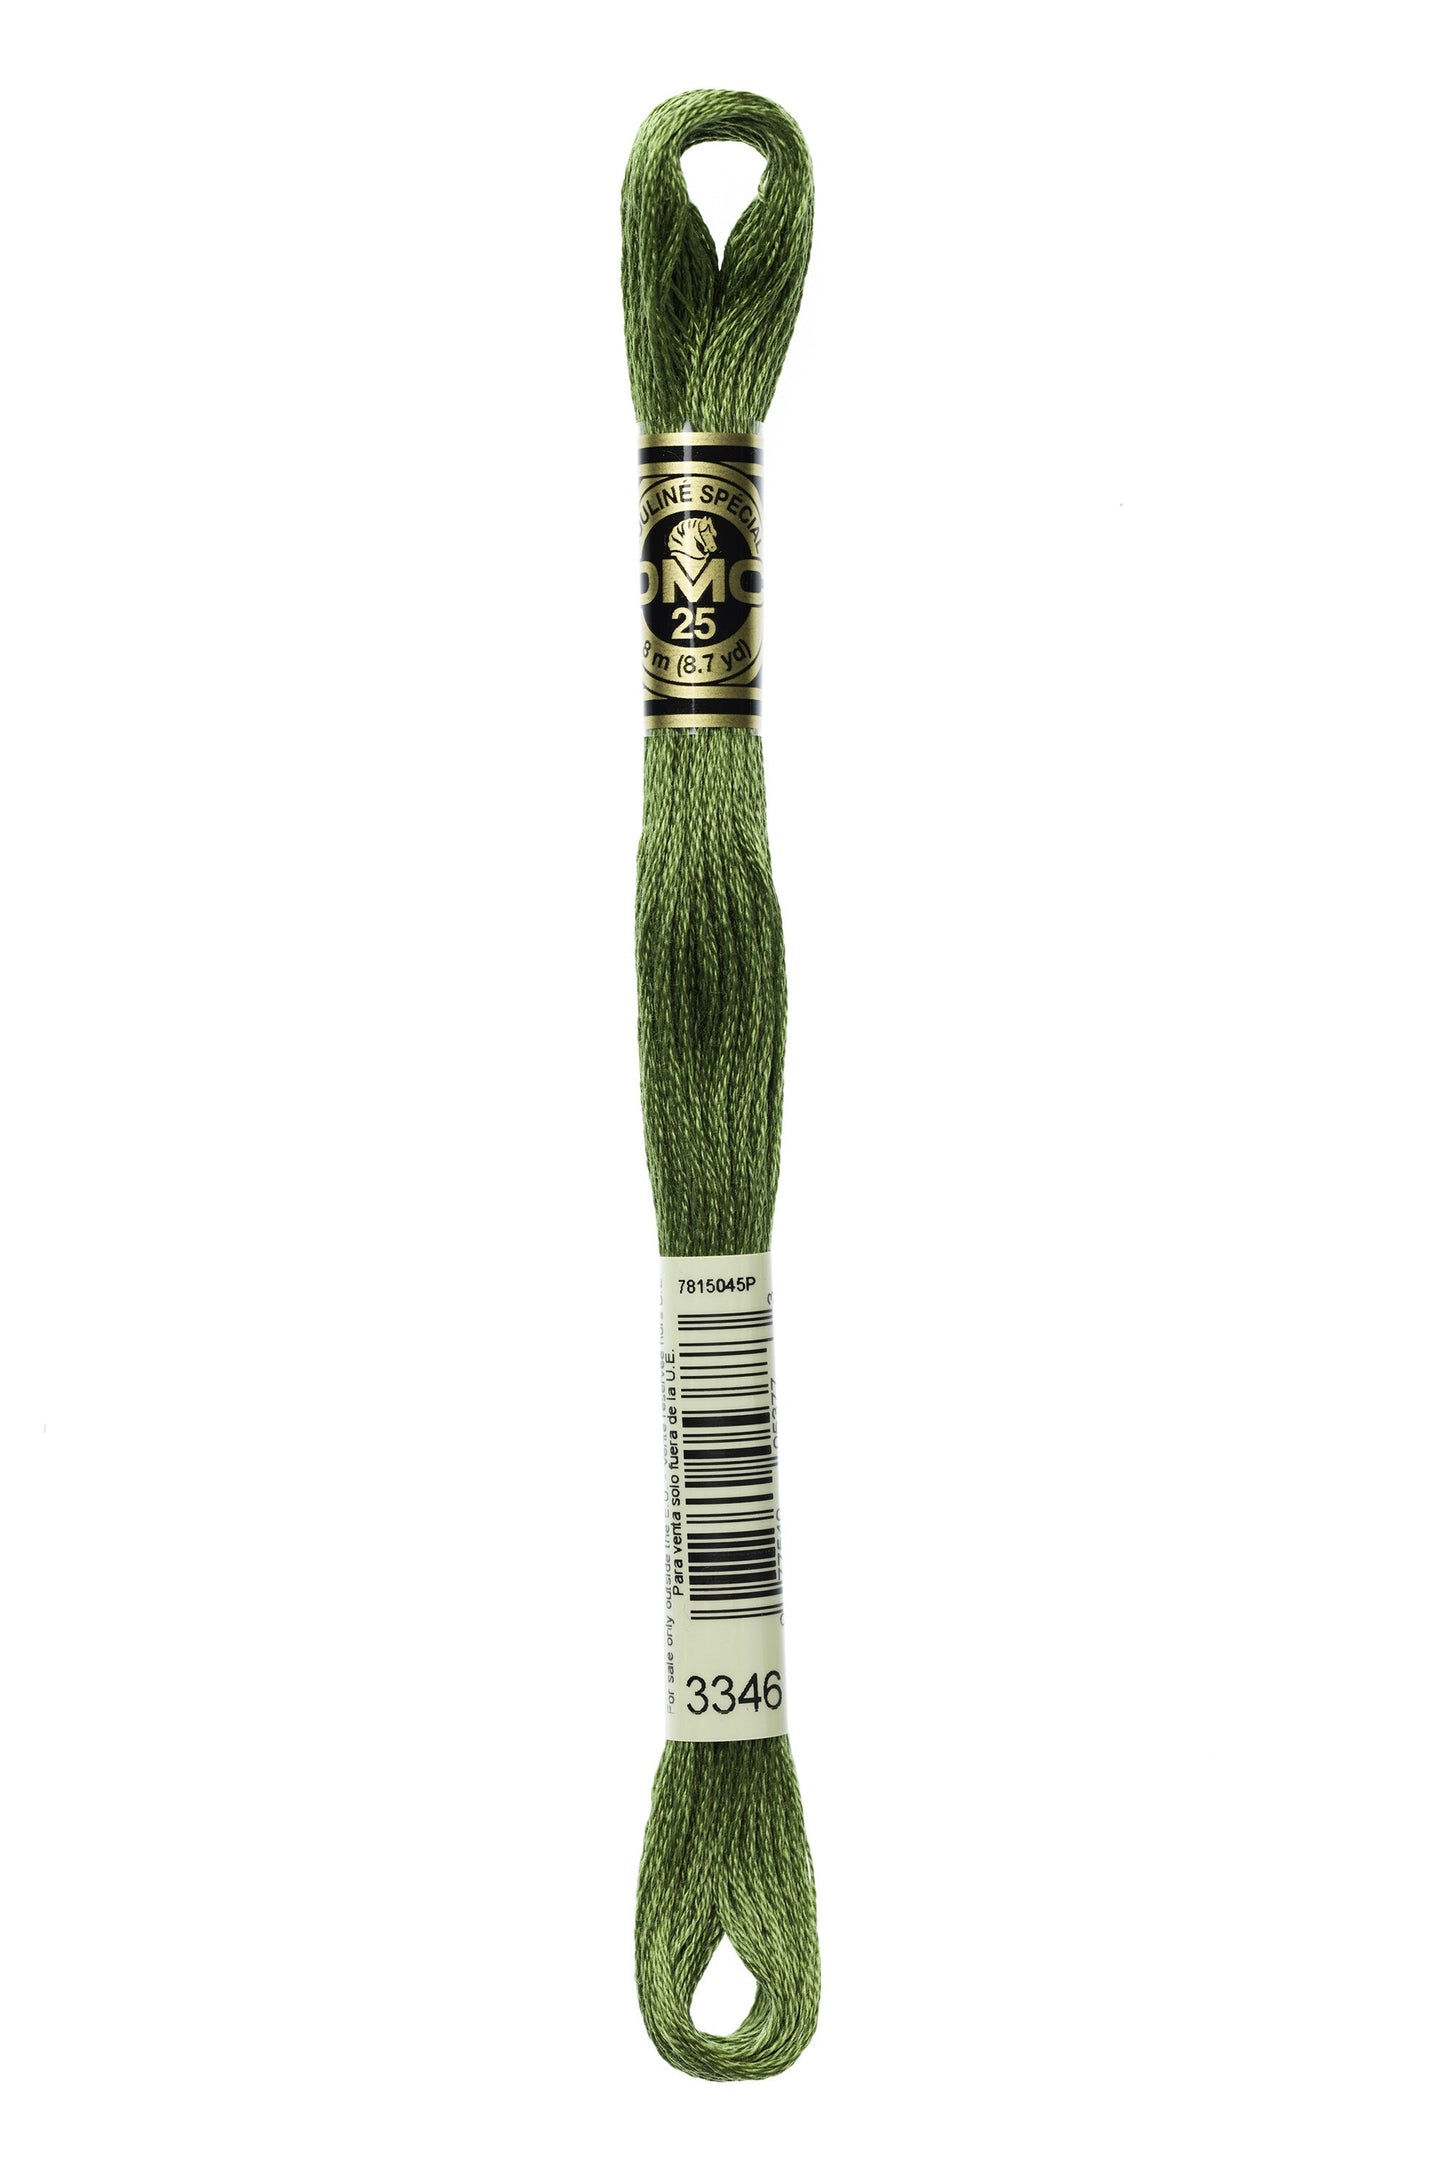 Six-Strand Embroidery Floss - 3346 (Artichoke)-Embroidery Thread-Wild and Woolly Yarns